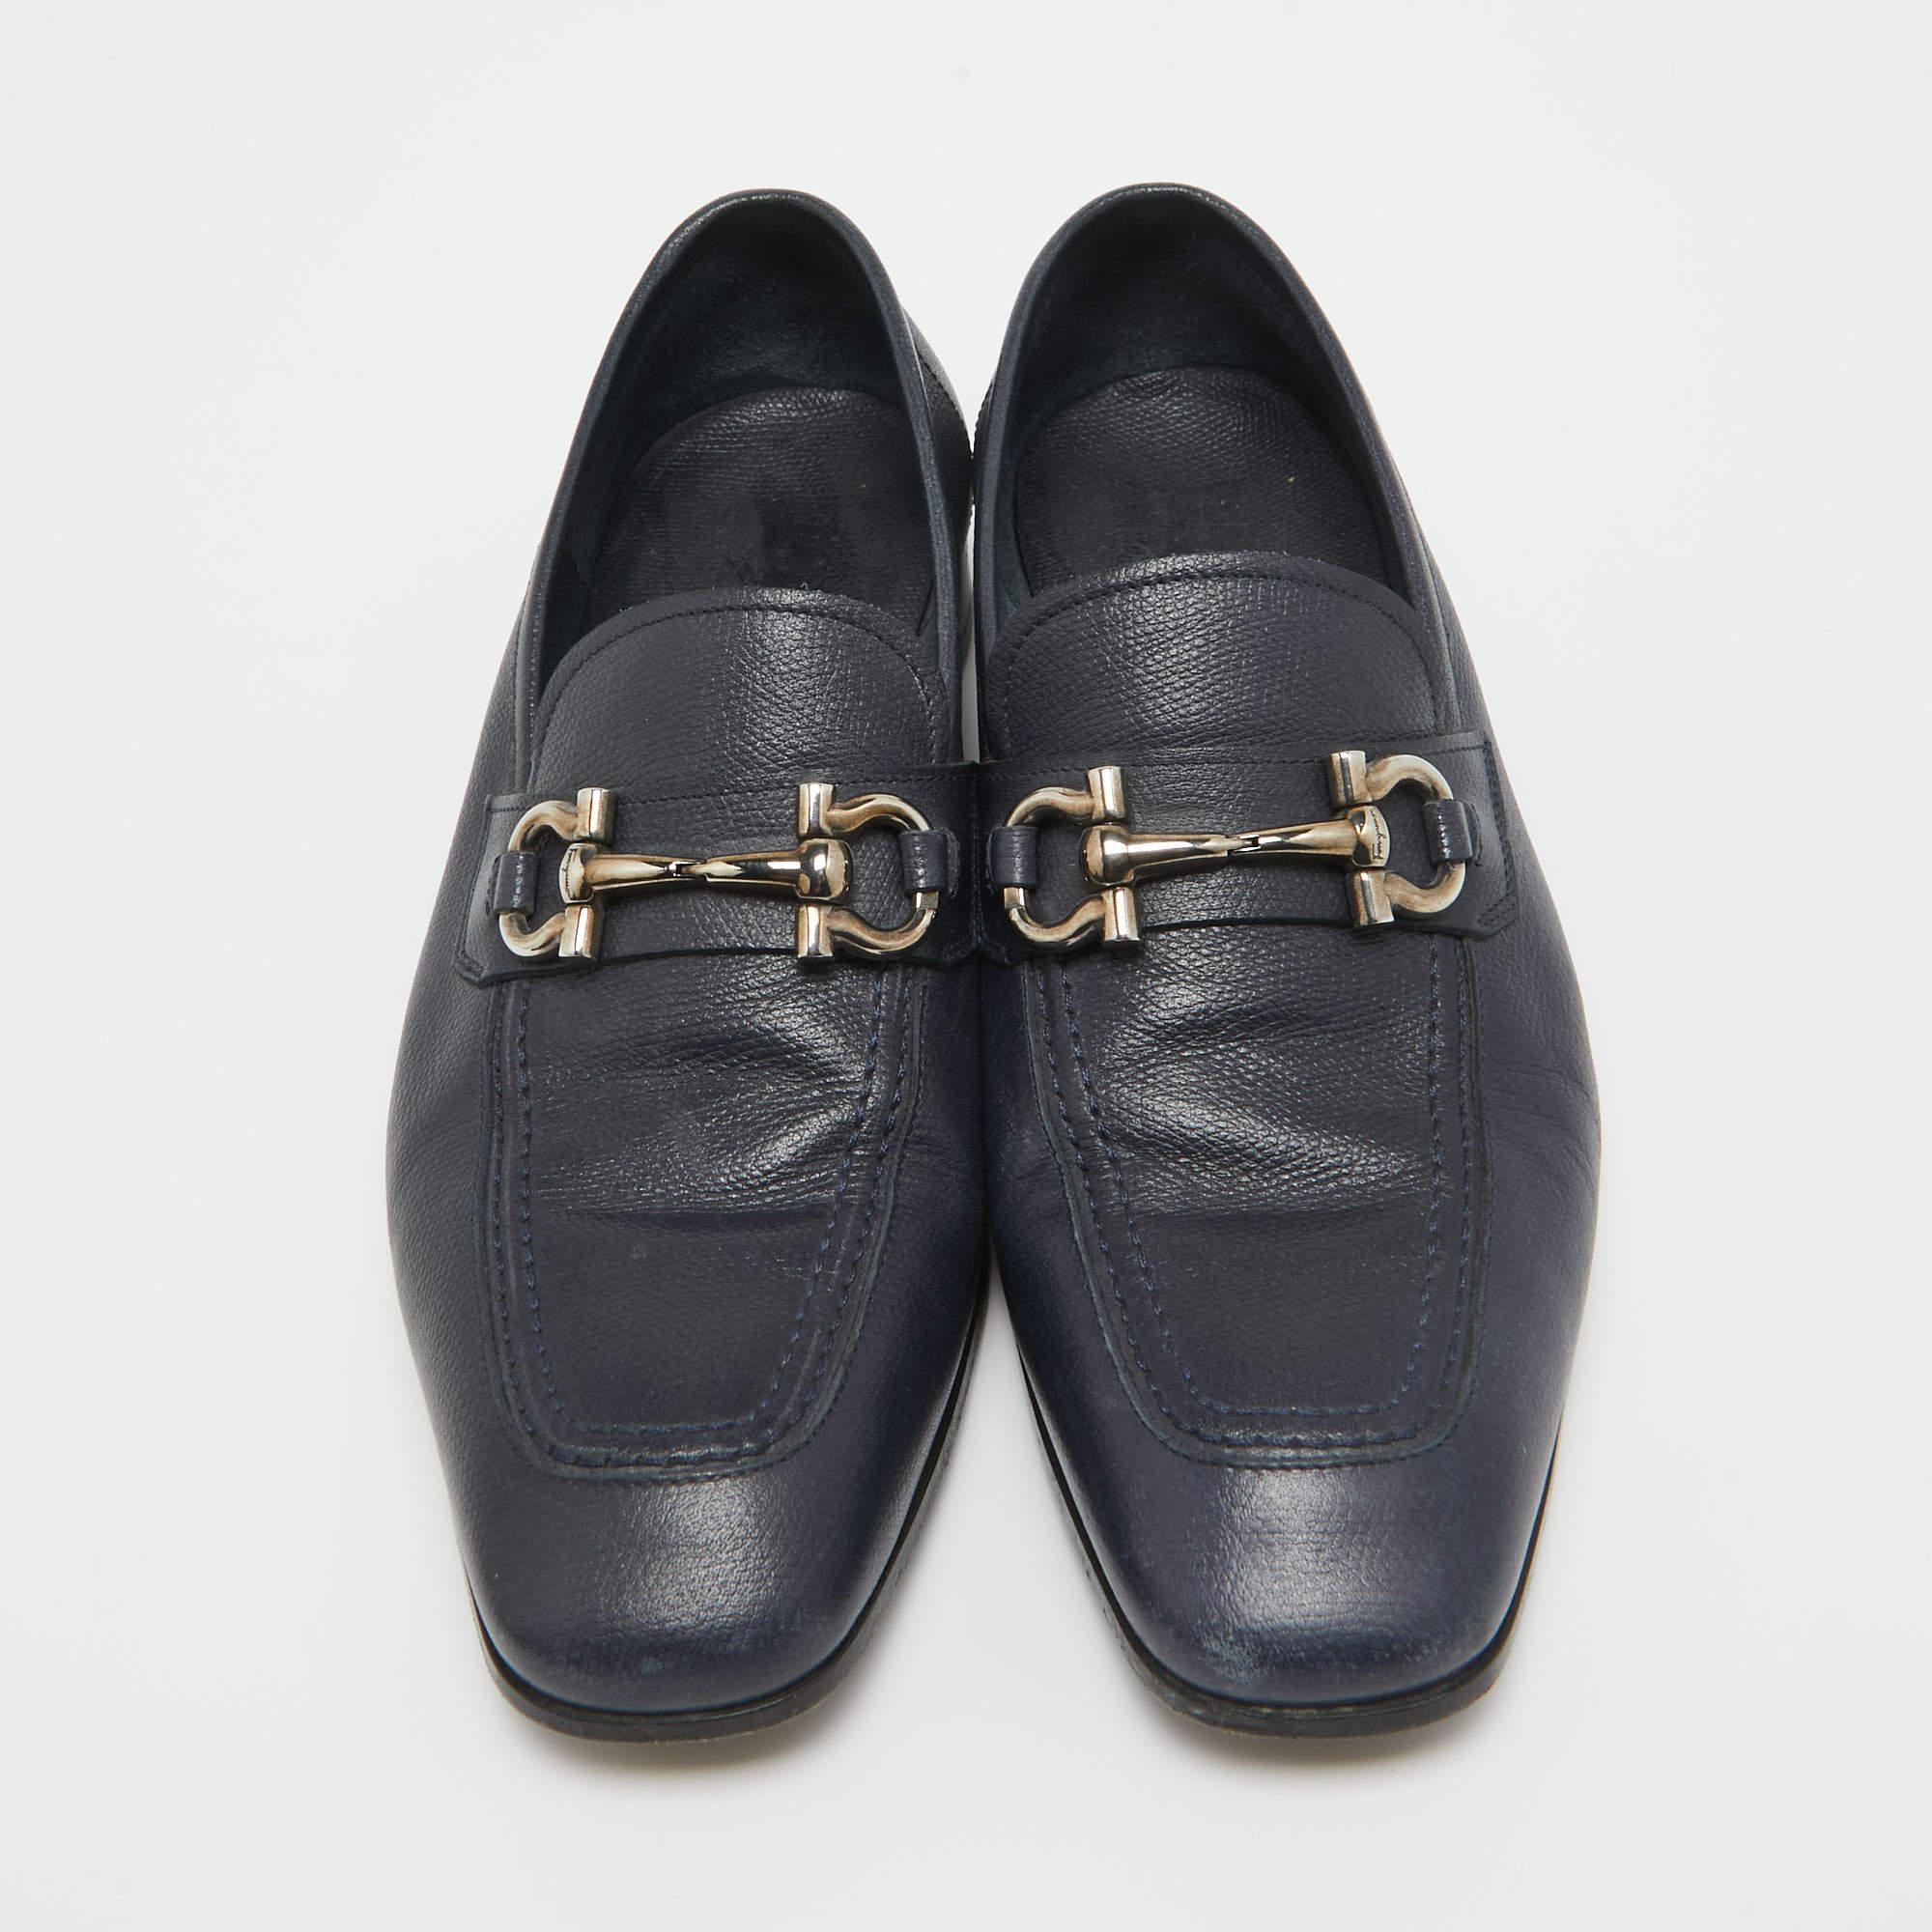 Practical, fashionable, and durable—these Salvatore Ferragamo loafers are carefully built to be fine companions to your everyday style. They come made using the best materials to be a prized buy.

